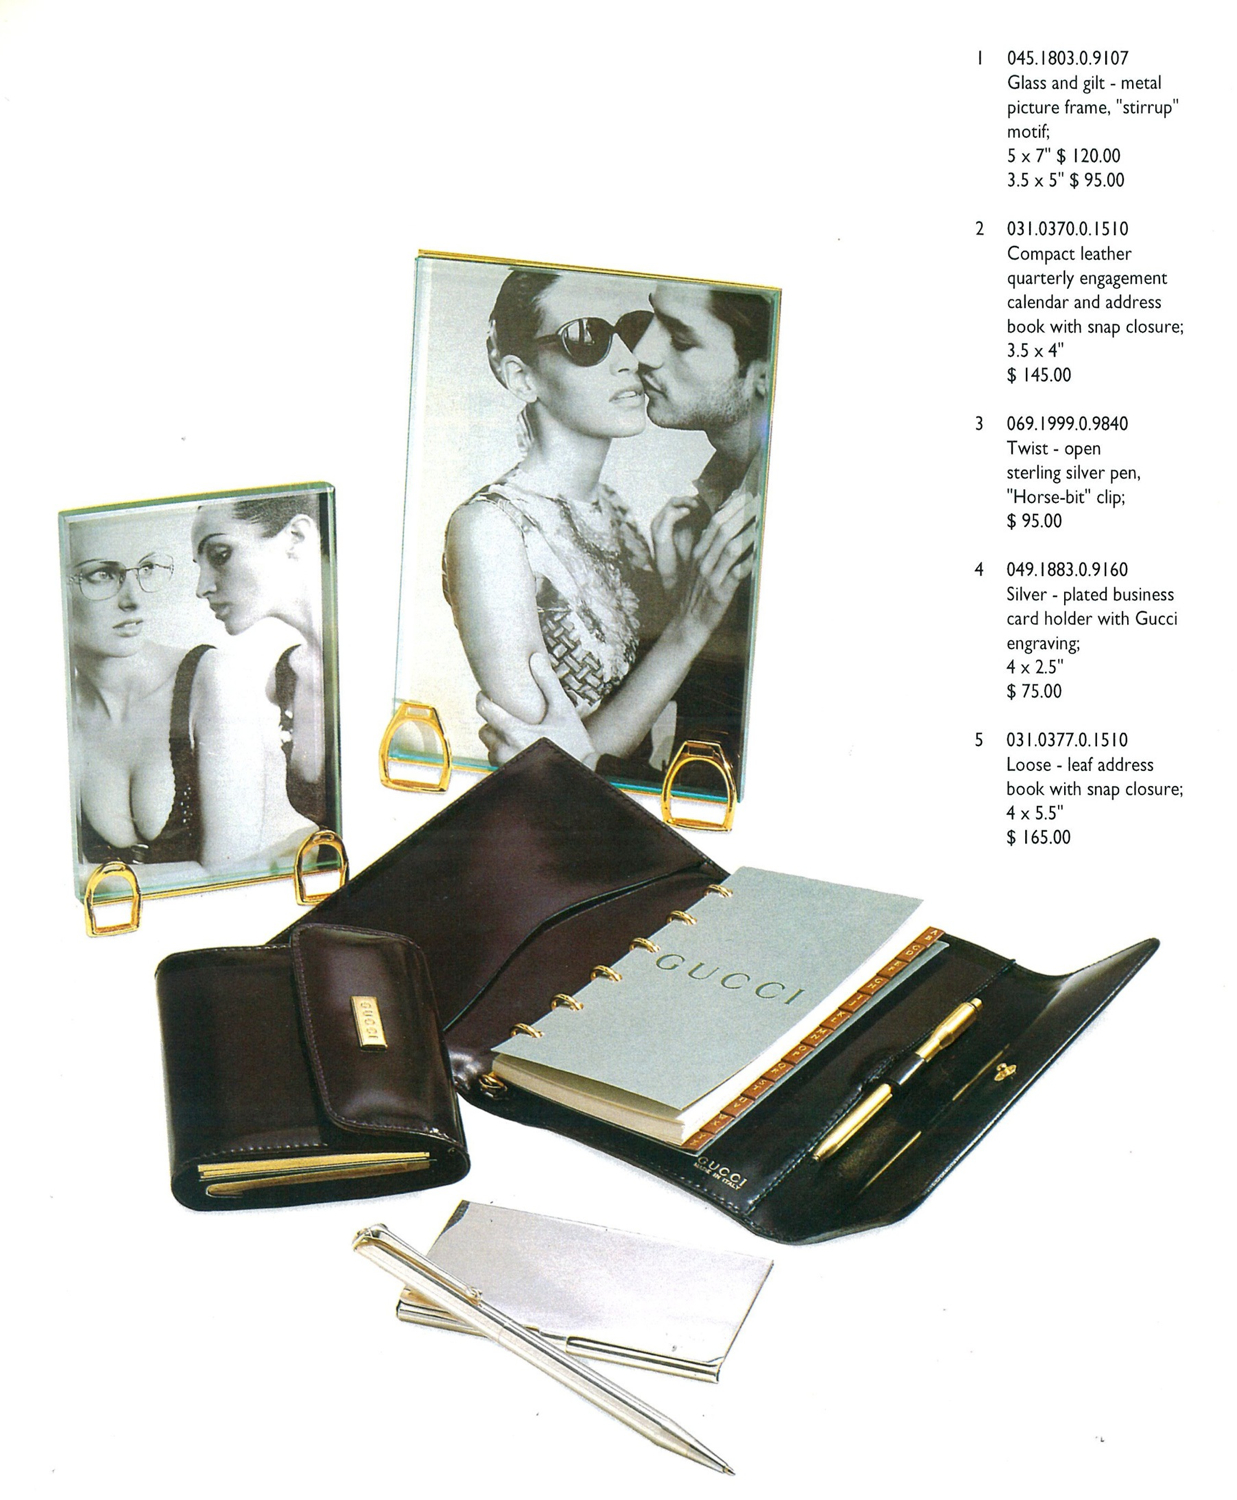 Gucci Desk Accesories 1995 Gilt Brass Stirrup Photo Picture Frames Sterling Silver Pen Buisiness Card Holder